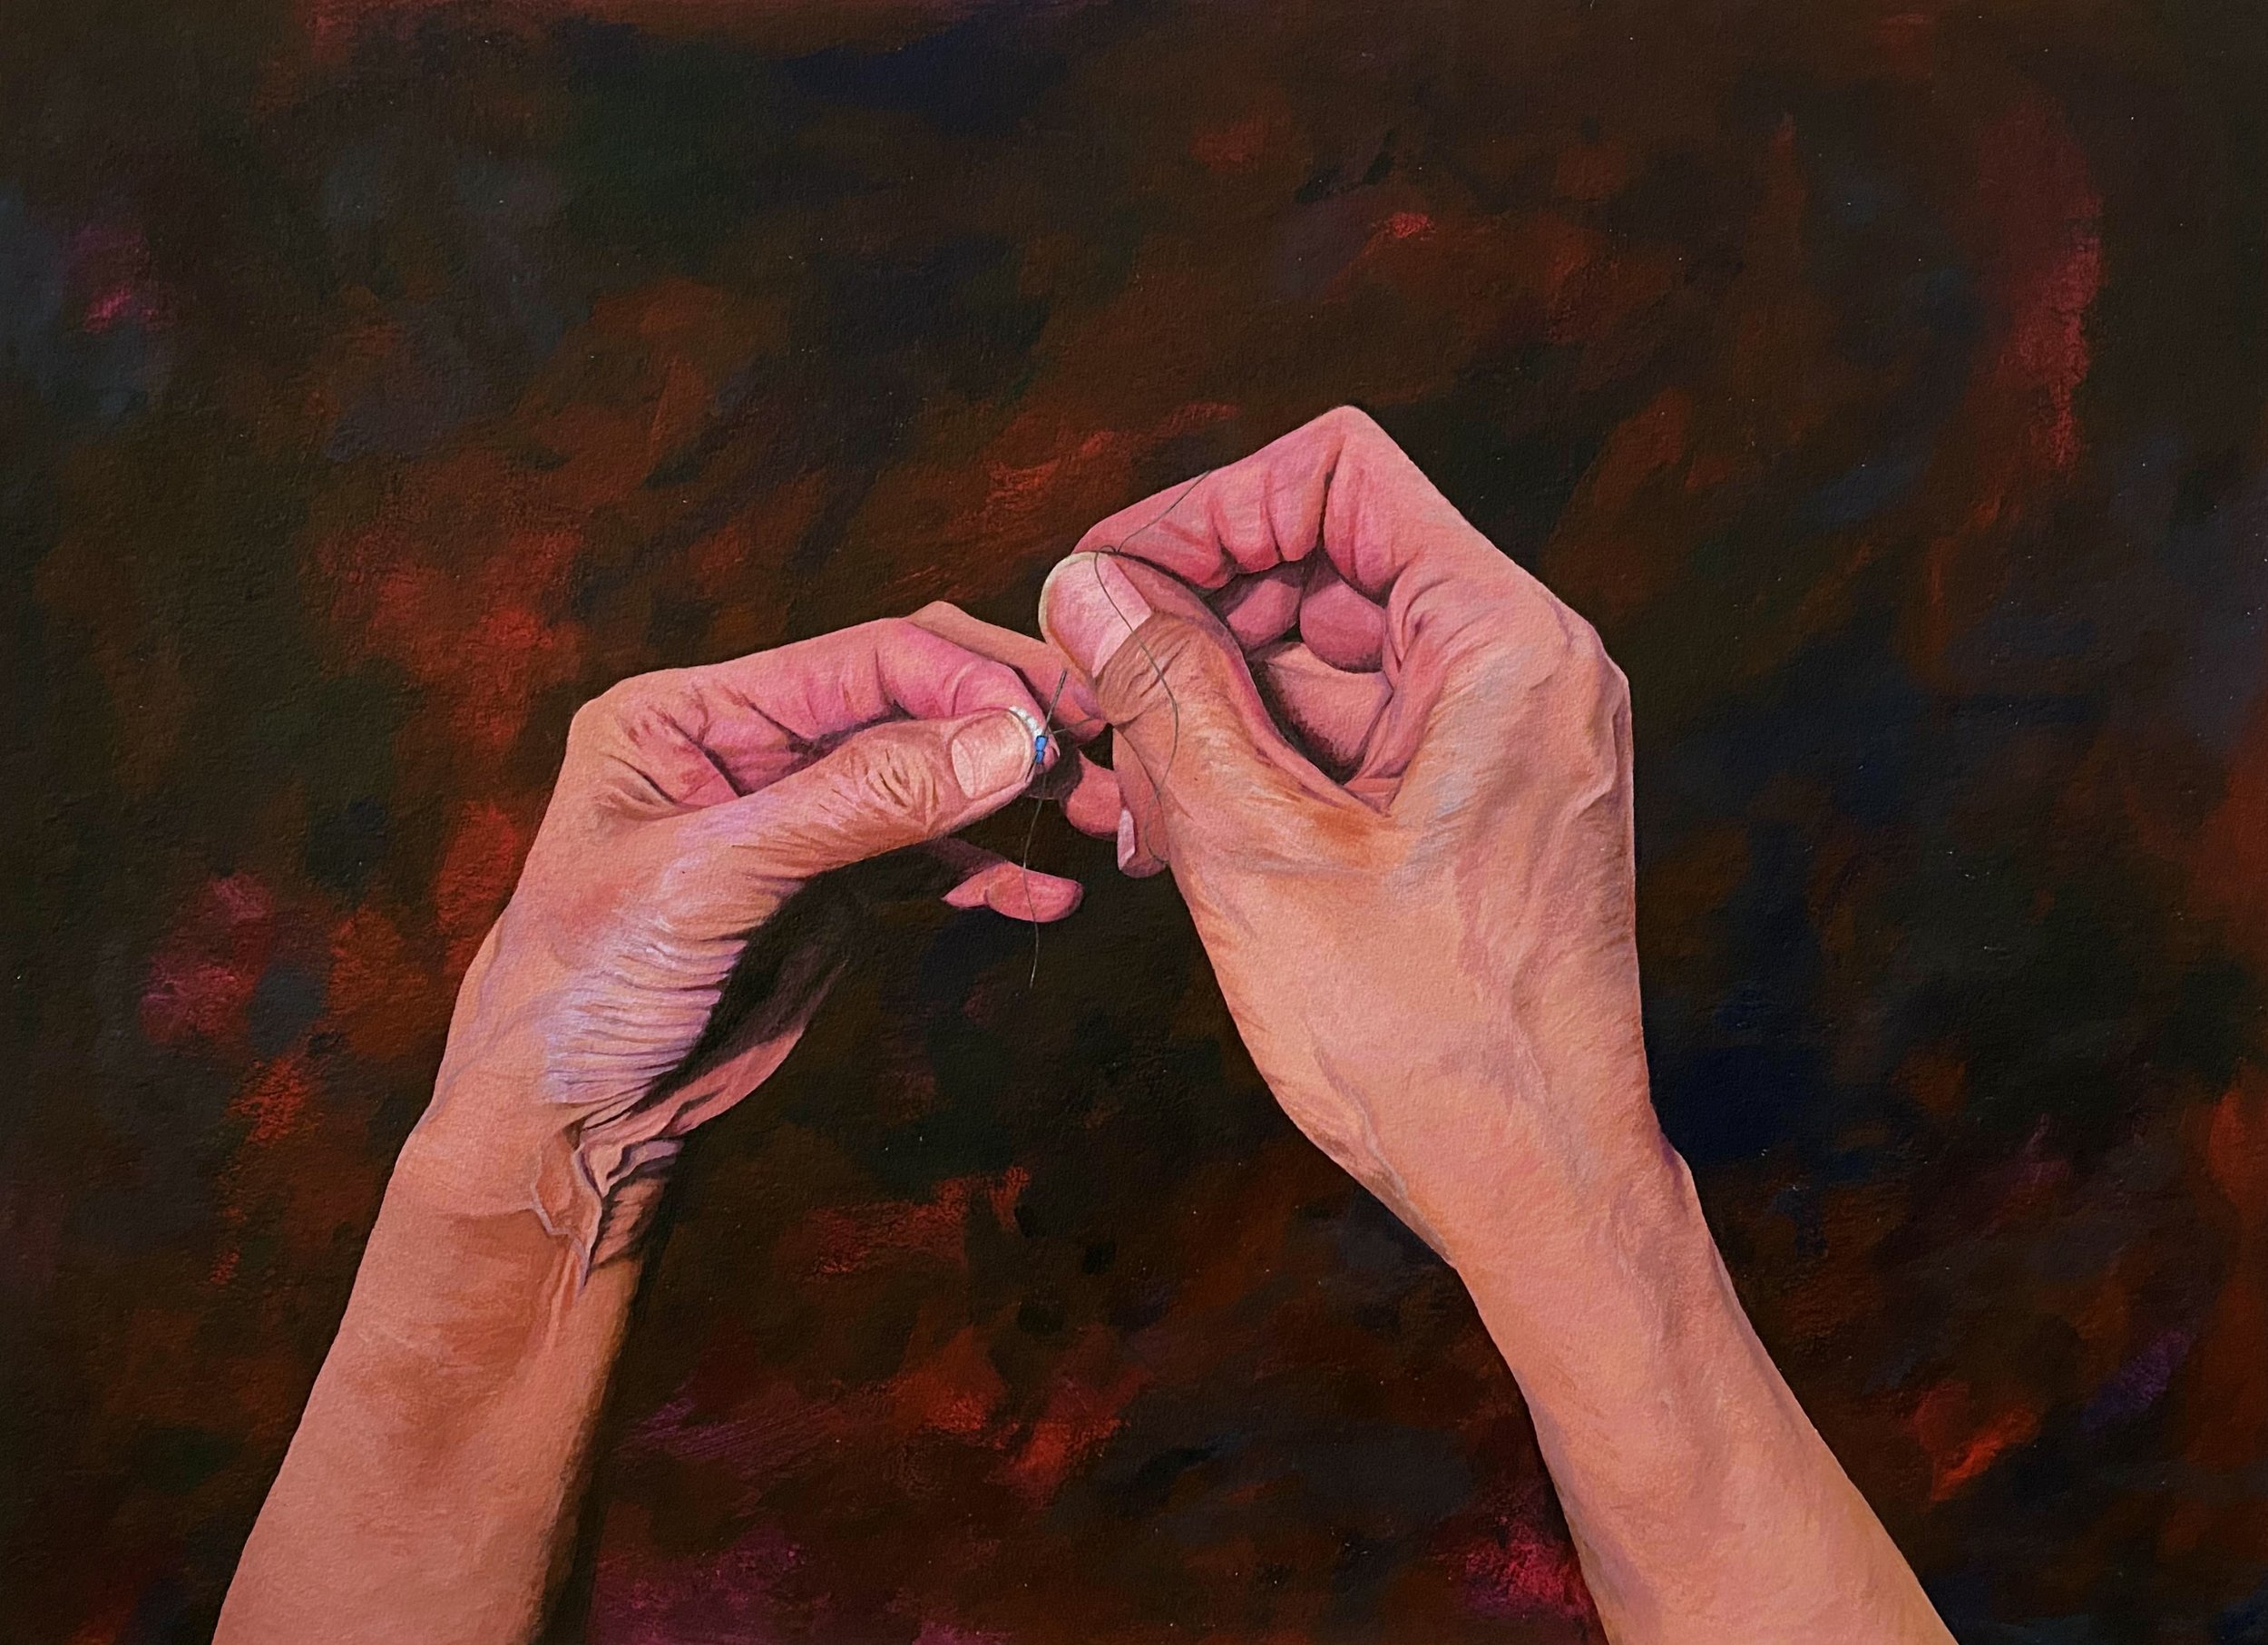  Jessica Winters,  Auntie Teaching Me to Make Earrings  (2022) Acrylic 76.2 x 57.2 cm. Image courtesy of the artist. 